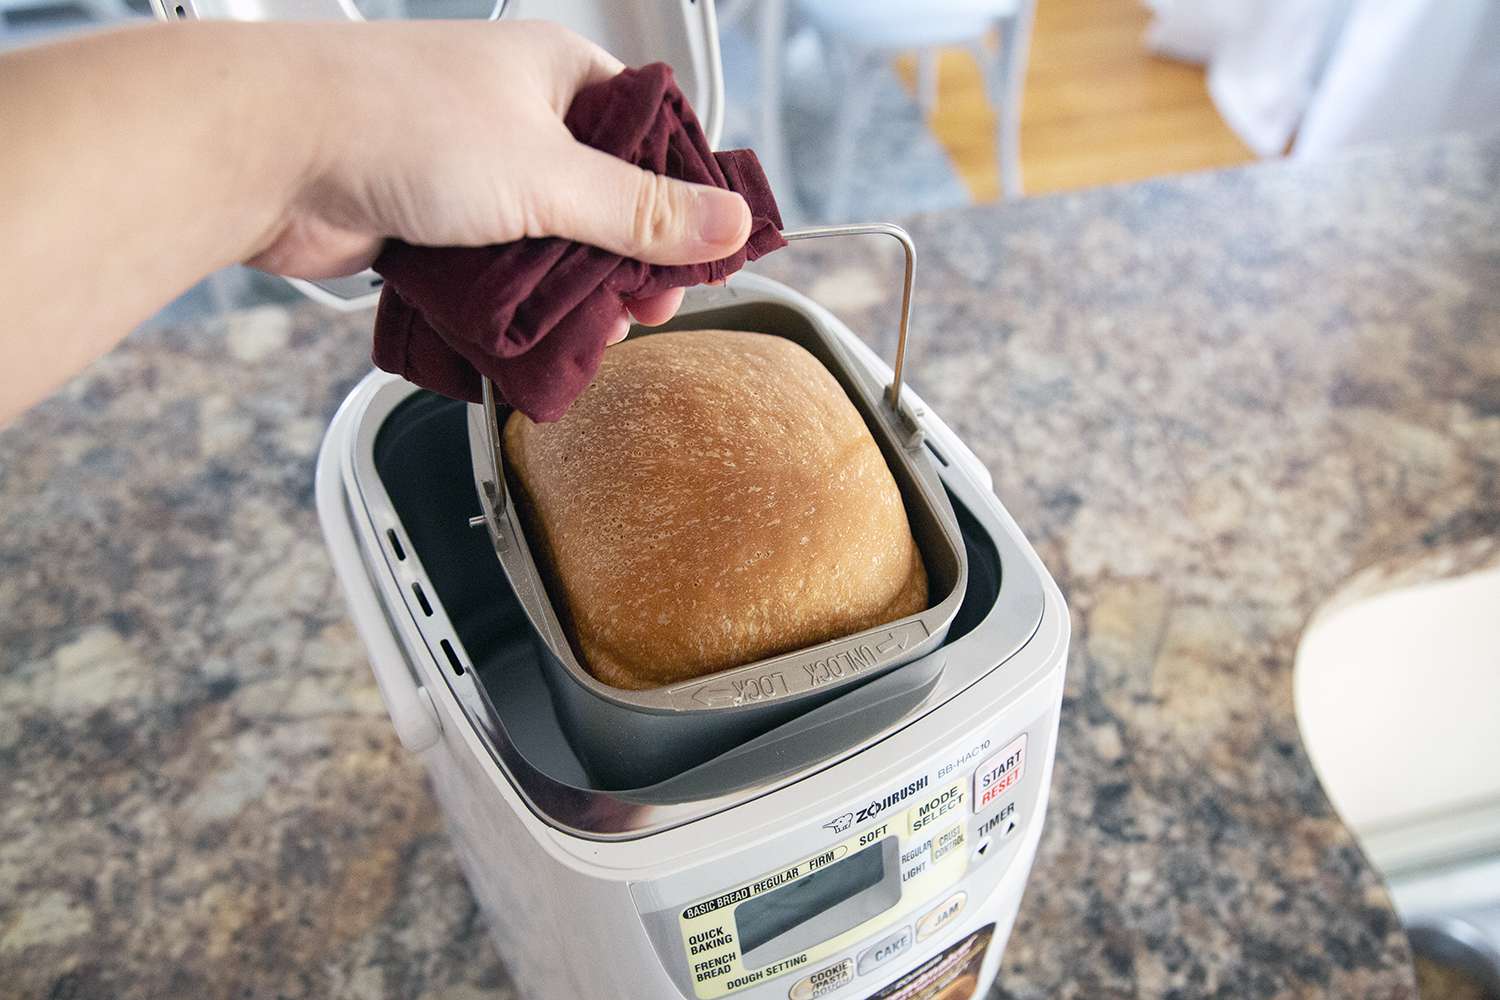  Briskind 19-in-1 Compact Bread Maker Machine, 1.5 lb / 1 lb  Loaf Small Breadmaker with Carrying Handle, Including Gluten Free, Dough,  Jam, Yogurt Menus, Bake Evenly, Automatic Keep Warm, 3 Crust